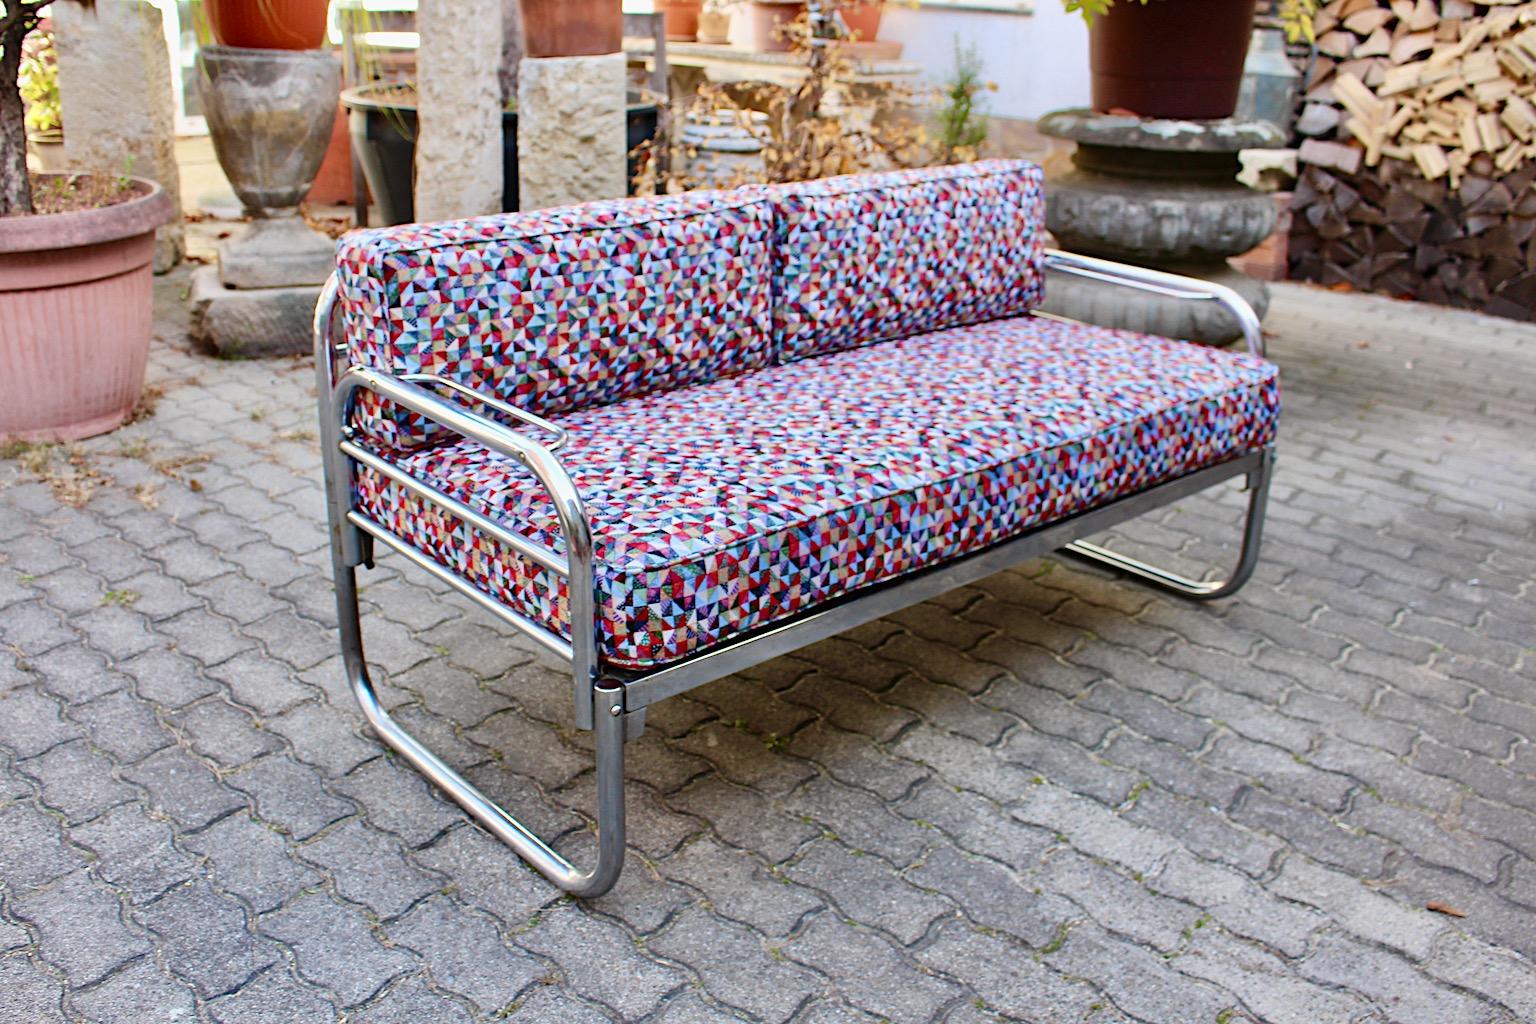 Early 20th Century Art Deco Bauhaus Vintage Chromed Tube Metal Sofa Daybed Franz Singer 1920s  For Sale